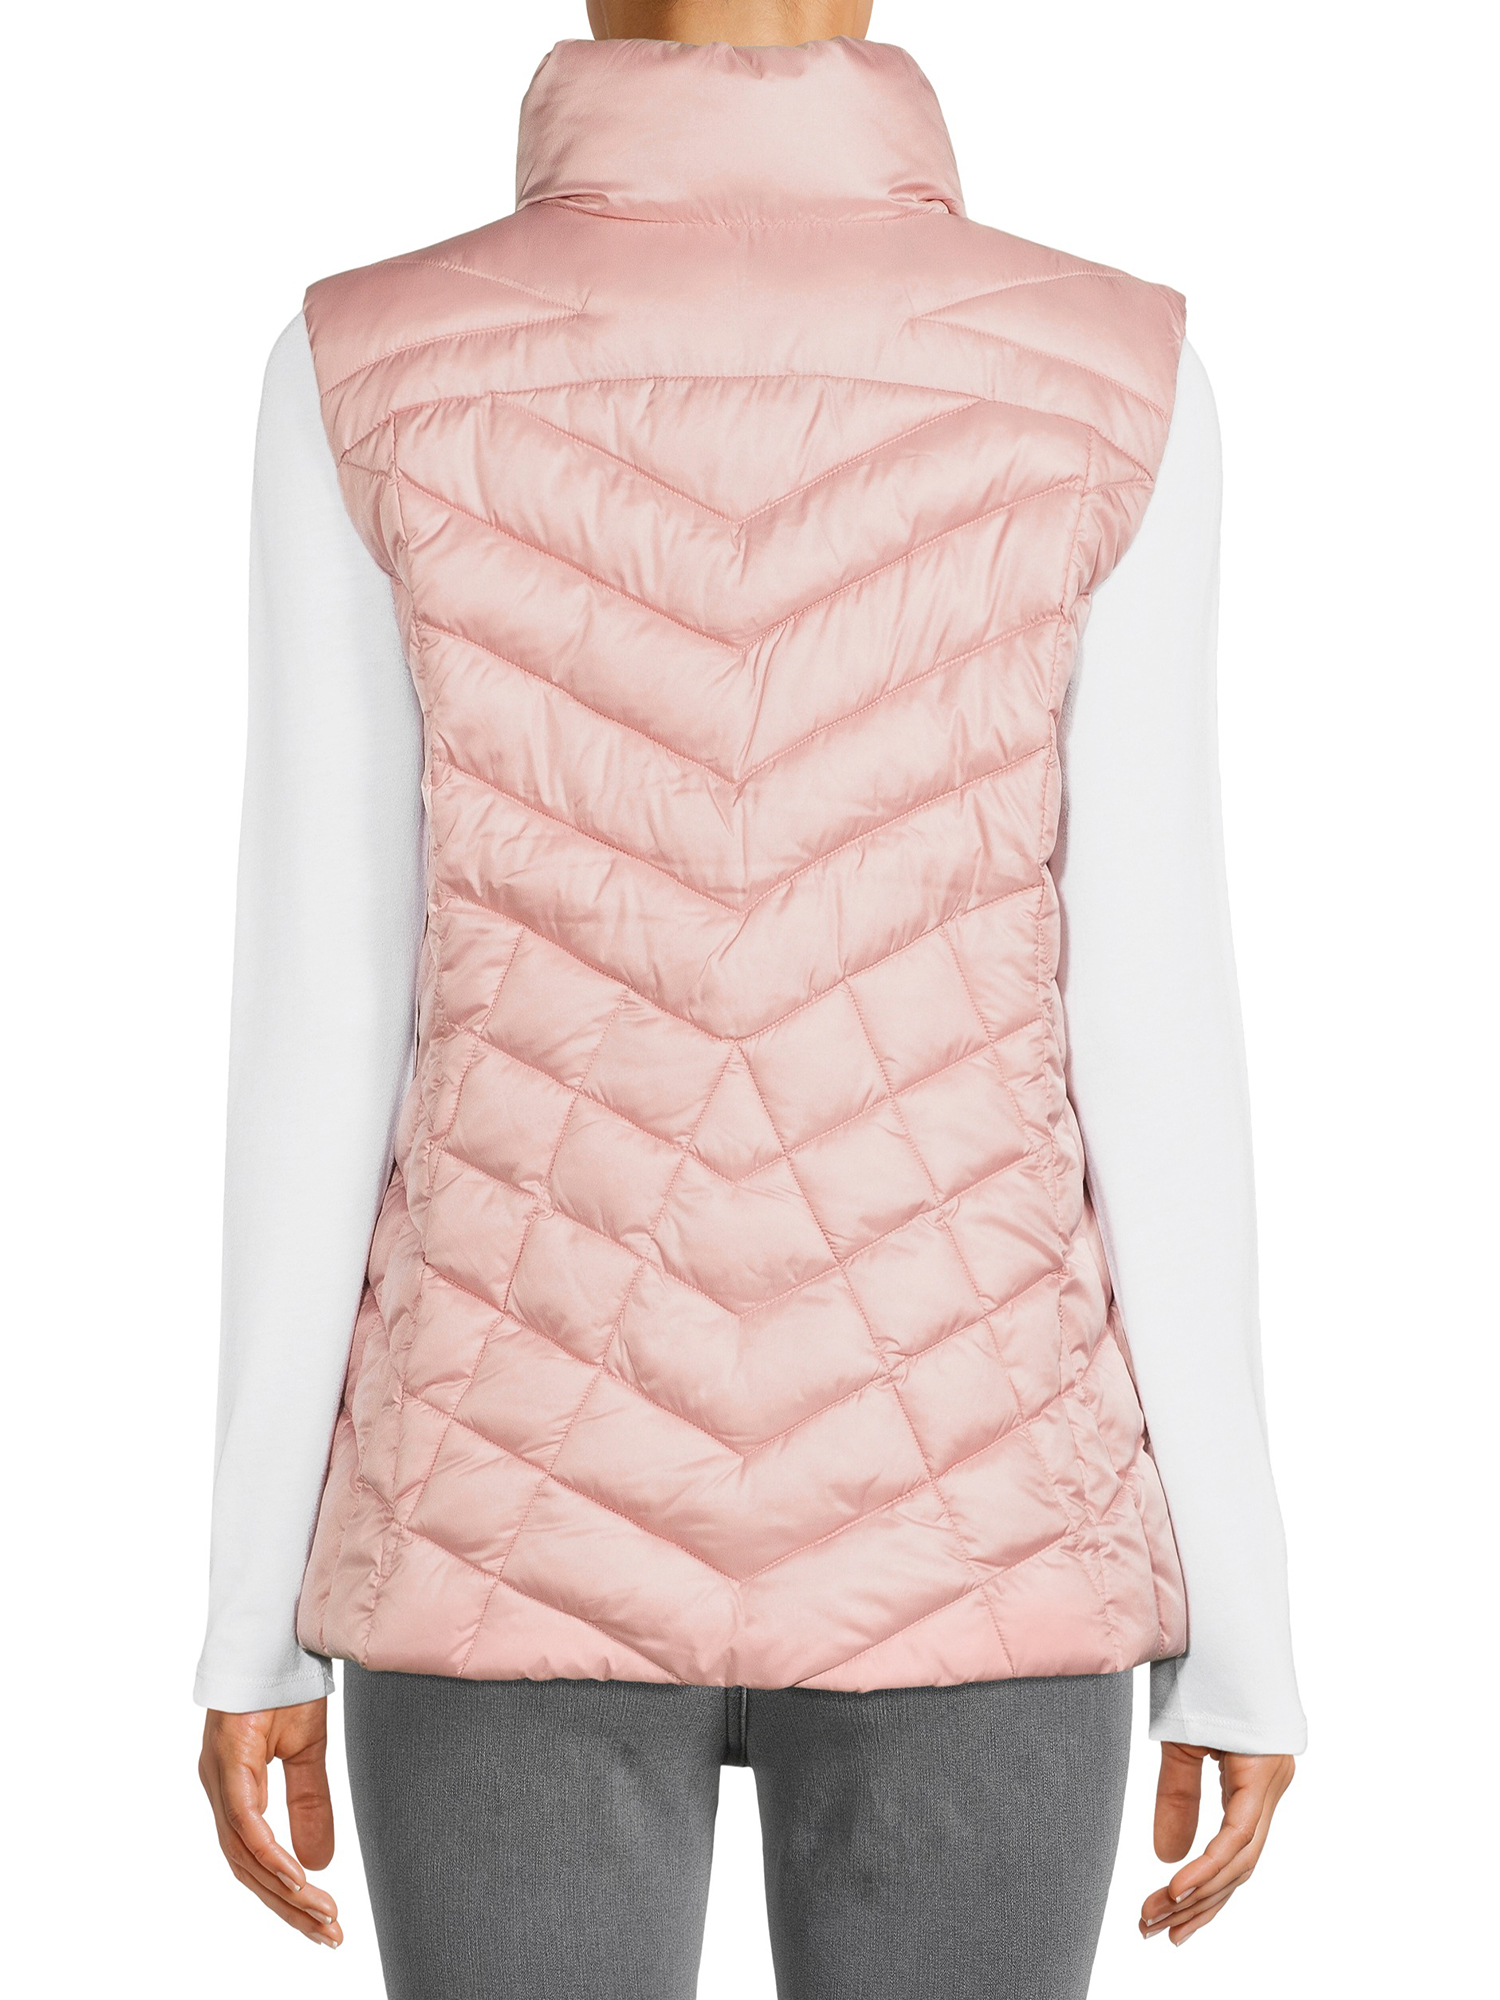 Big Chill Women's Chevron Quilted Puffer Vest - image 4 of 5